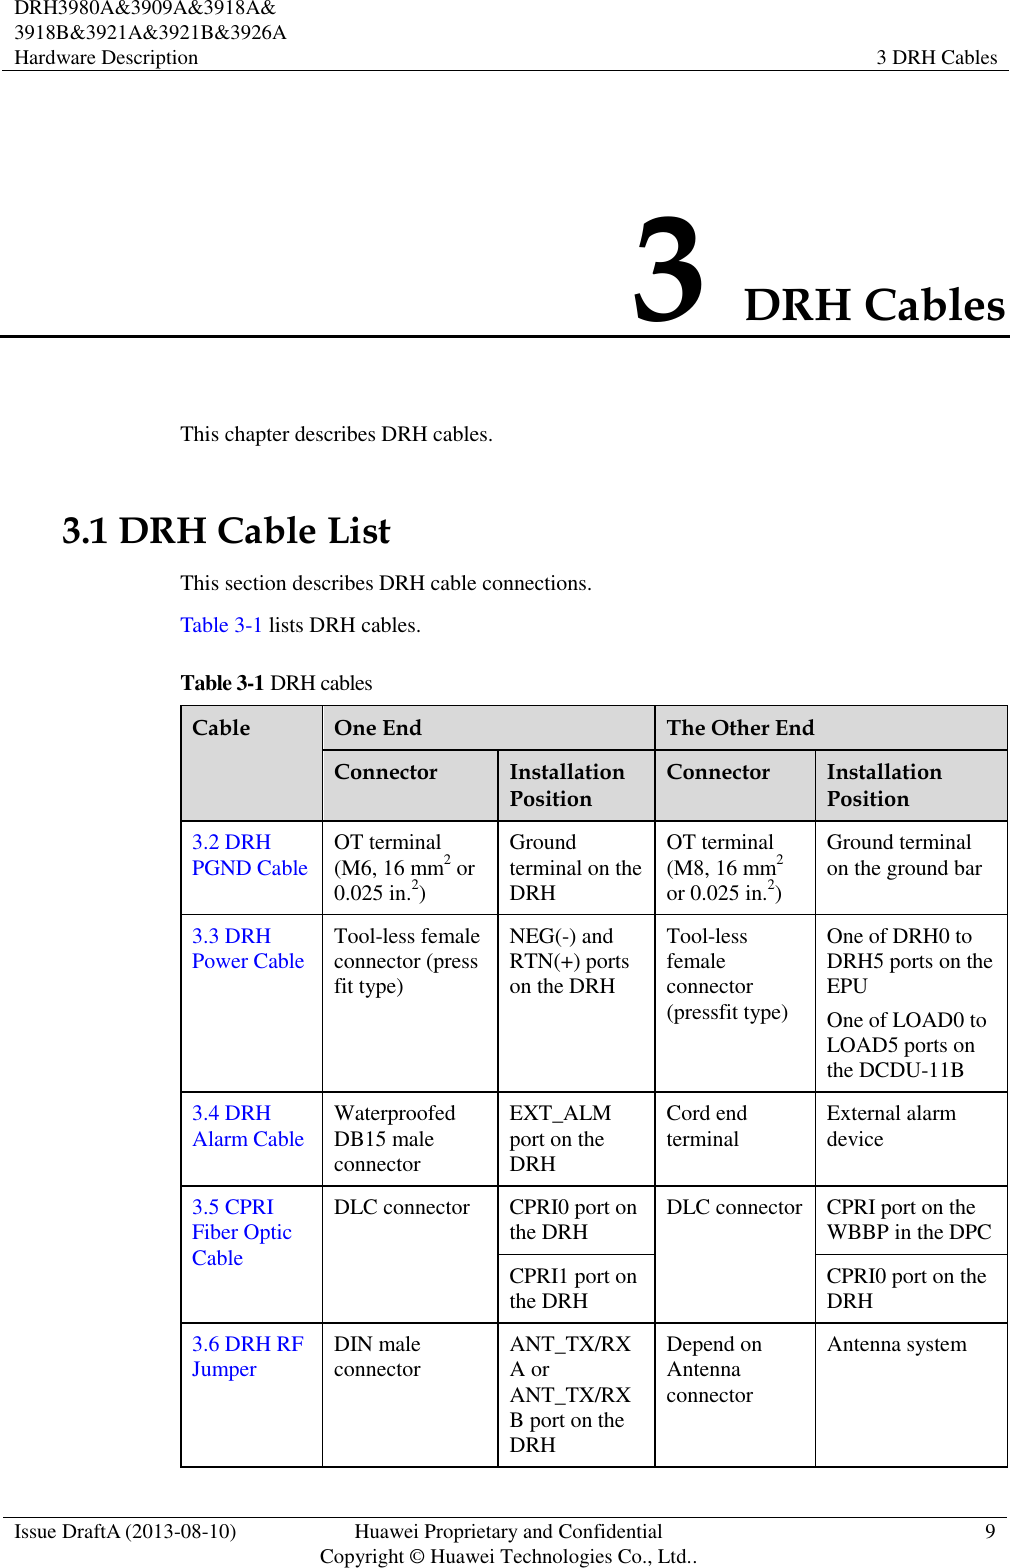  DRH3980A&amp;3909A&amp;3918A&amp; 3918B&amp;3921A&amp;3921B&amp;3926A Hardware Description   3 DRH Cables  Issue DraftA (2013-08-10) Huawei Proprietary and Confidential                                     Copyright © Huawei Technologies Co., Ltd.. 9    3 DRH Cables This chapter describes DRH cables. 3.1 DRH Cable List This section describes DRH cable connections. Table 3-1 lists DRH cables. Table 3-1 DRH cables Cable One End The Other End Connector Installation Position Connector Installation Position 3.2 DRH PGND Cable OT terminal (M6, 16 mm2 or 0.025 in.2) Ground terminal on the DRH OT terminal (M8, 16 mm2 or 0.025 in.2) Ground terminal on the ground bar 3.3 DRH Power Cable Tool-less female connector (press fit type) NEG(-) and RTN(+) ports on the DRH Tool-less female connector (pressfit type) One of DRH0 to DRH5 ports on the EPU One of LOAD0 to LOAD5 ports on the DCDU-11B 3.4 DRH Alarm Cable Waterproofed DB15 male connector EXT_ALM port on the DRH Cord end terminal External alarm device 3.5 CPRI Fiber Optic Cable DLC connector CPRI0 port on the DRH DLC connector CPRI port on the WBBP in the DPC CPRI1 port on the DRH CPRI0 port on the DRH 3.6 DRH RF Jumper DIN male connector ANT_TX/RXA or ANT_TX/RXB port on the DRH Depend on Antenna connector Antenna system 